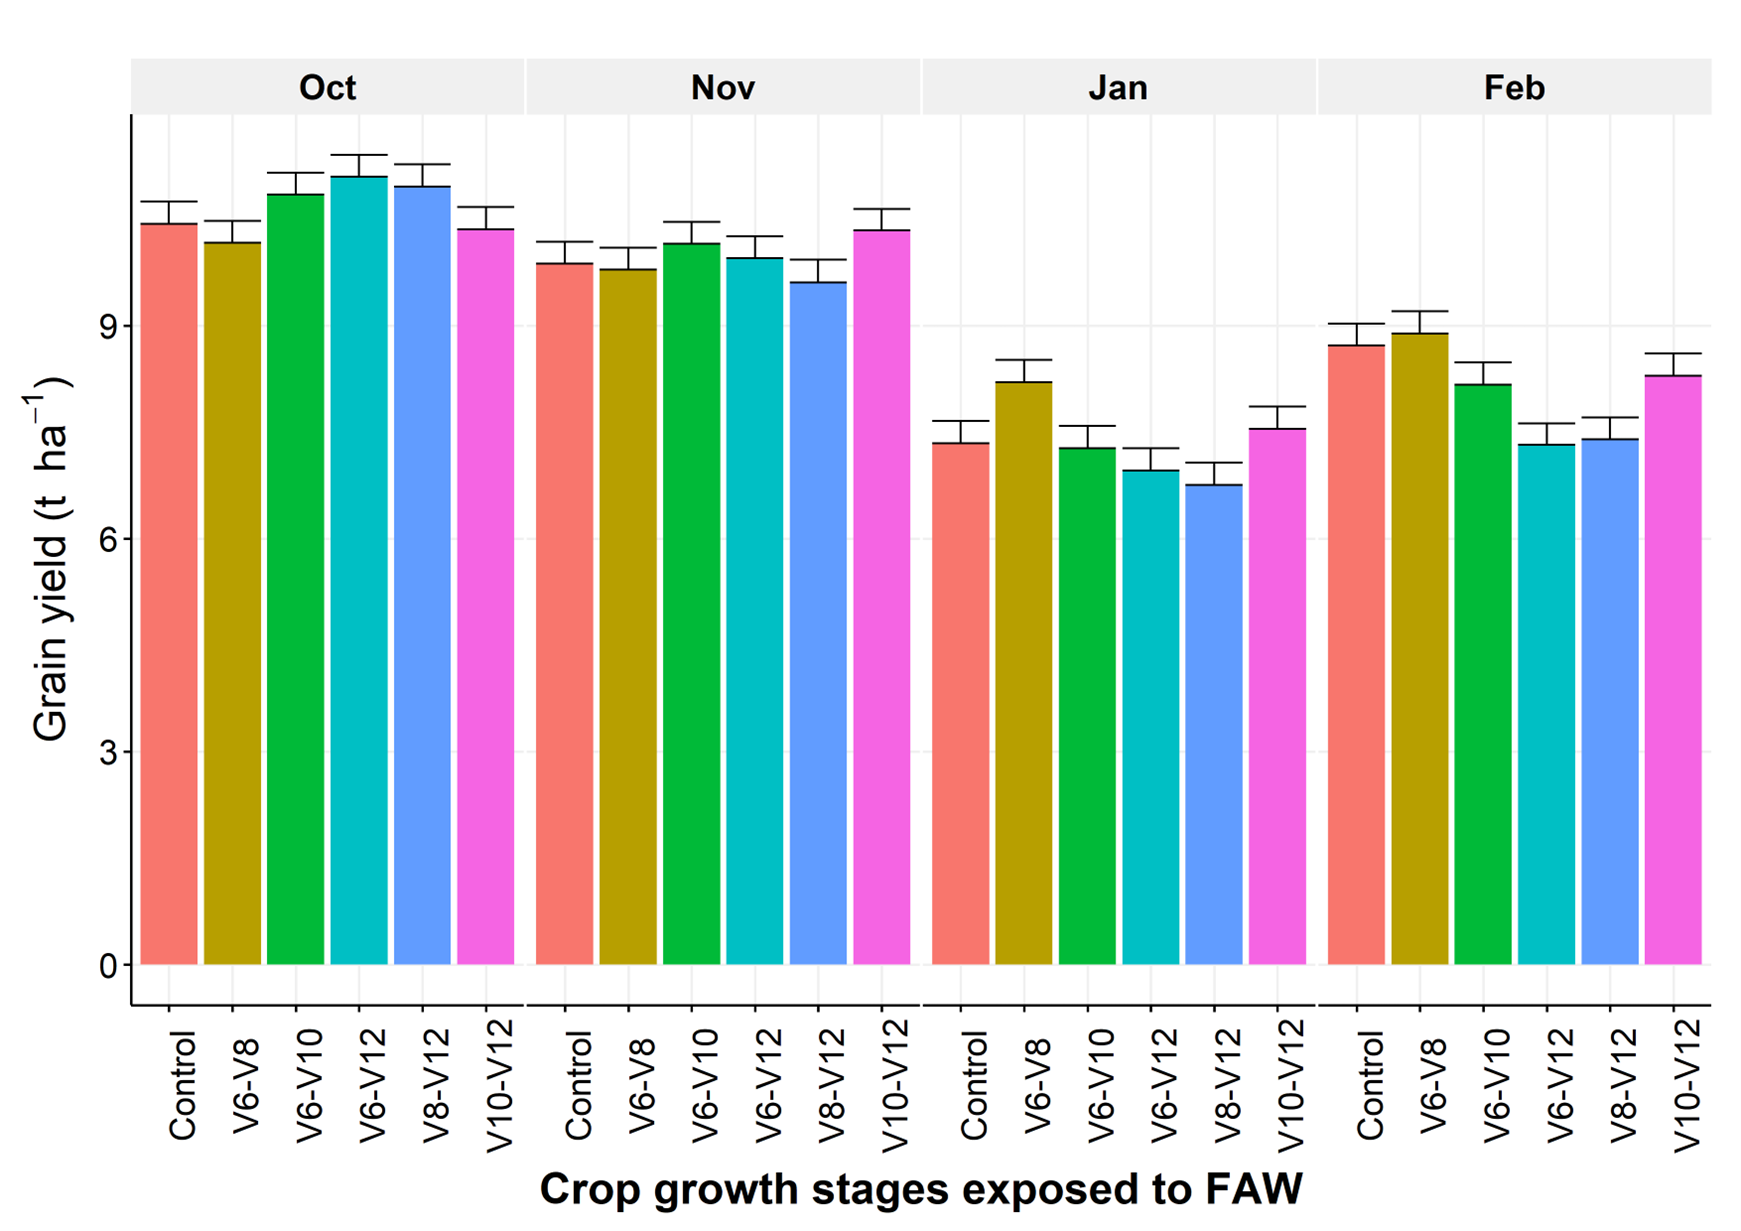 Figure 1 is a column graph showing the effect of natural FAW infestations on sorghum grain yield at four different crop sowing times (11-Oct, 7-Nov, 17-Jan, 3-Feb). Natural FAW infestations were controlled to coincide with crop development stages. V stages indicate the number of fully expanded leaves on the main stem.